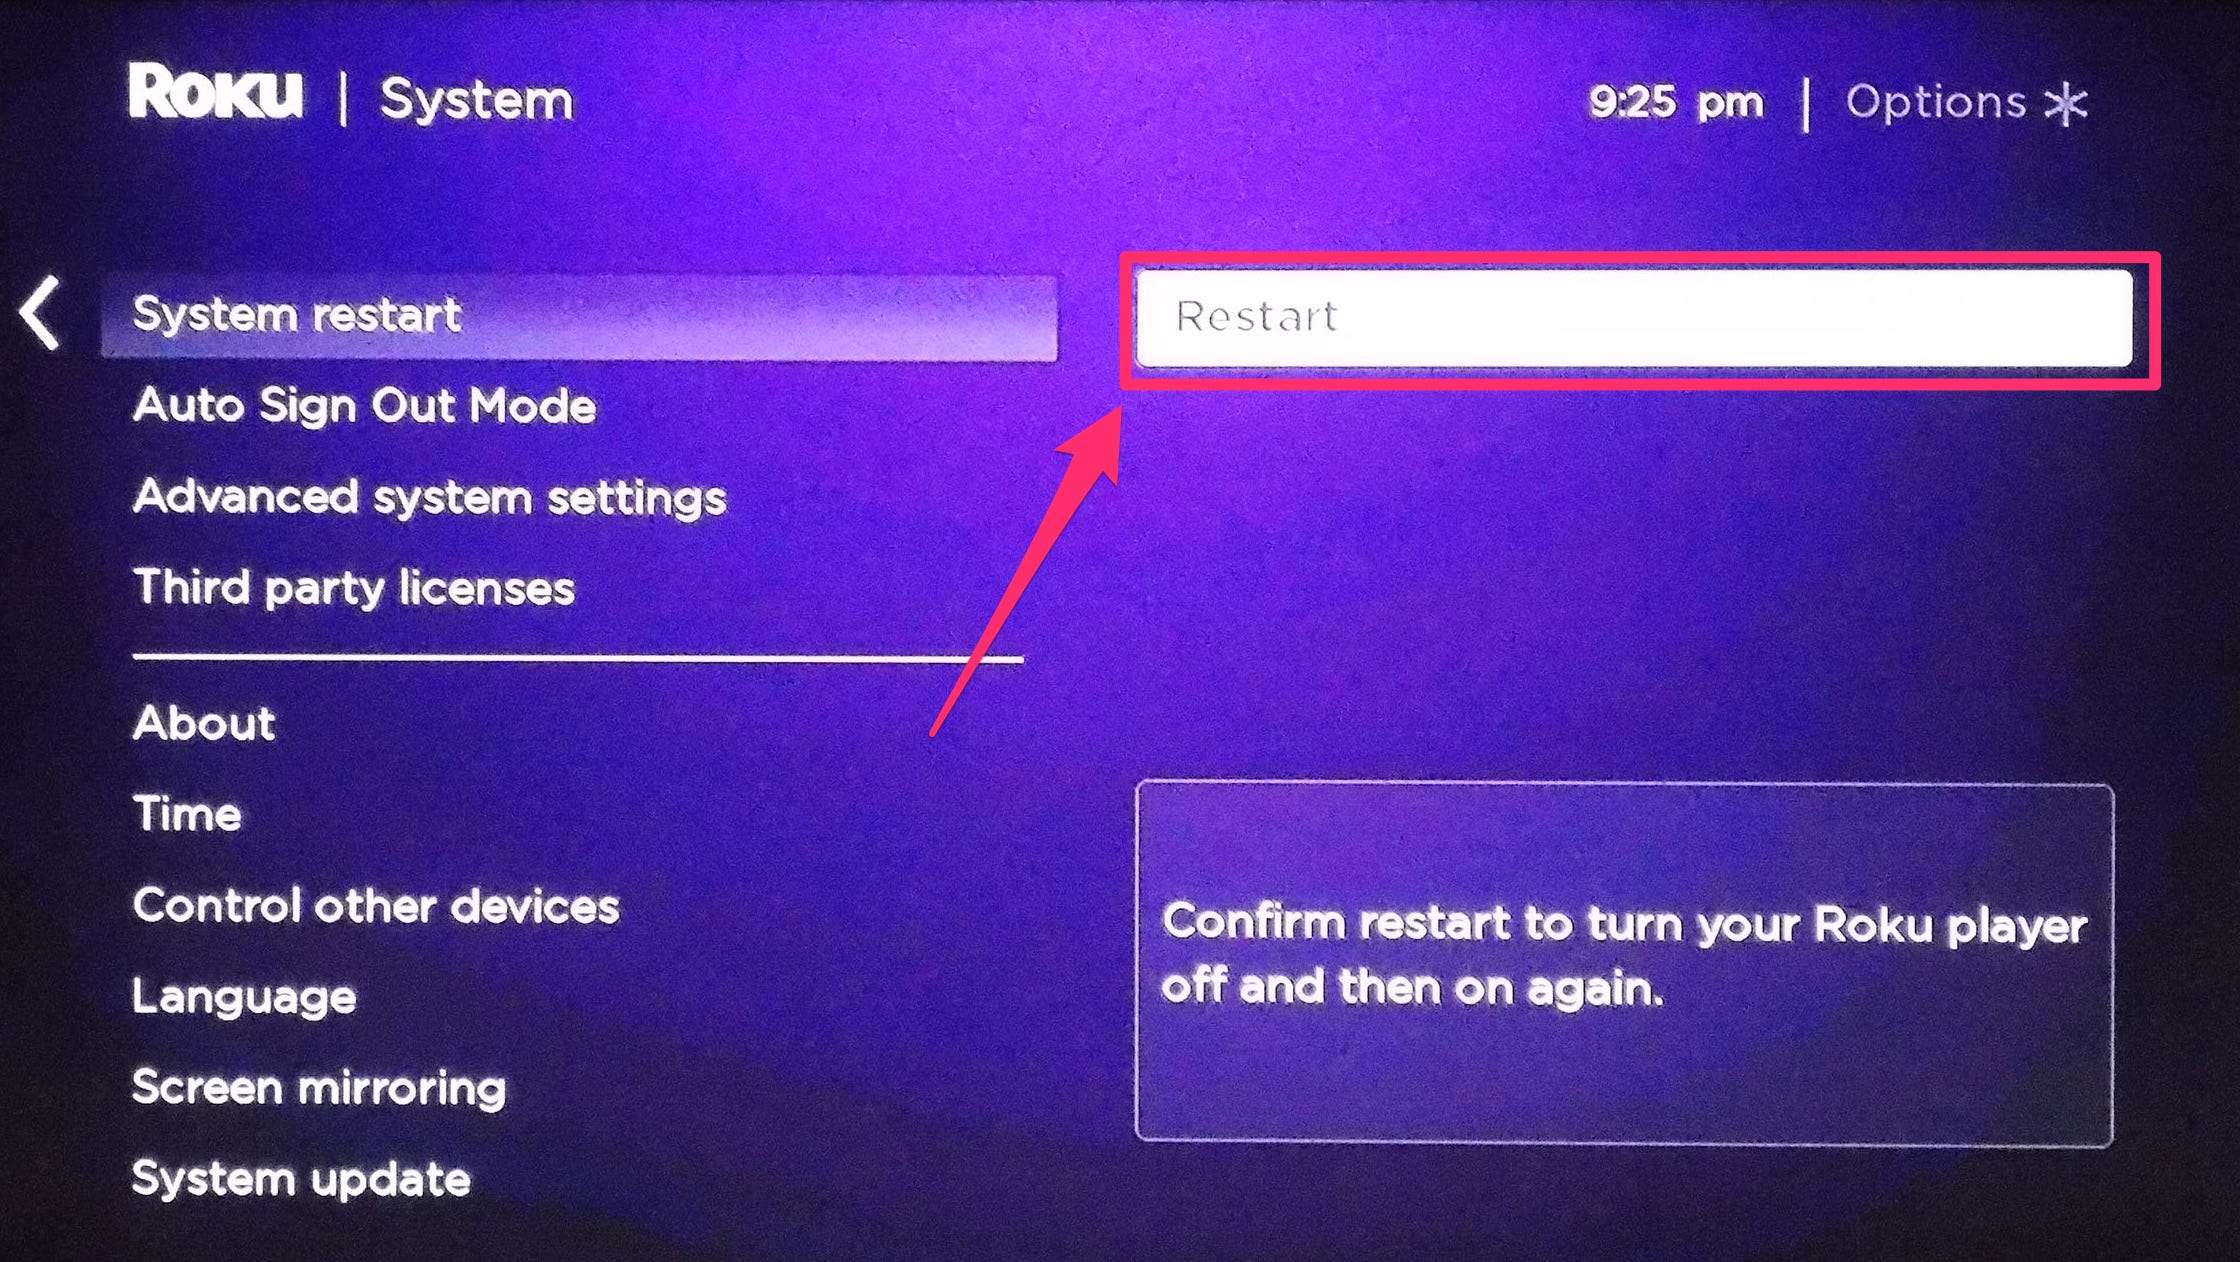 Select System and then choose Advanced System Settings.
Click on Factory Reset and follow the on-screen instructions to reset your Roku device.